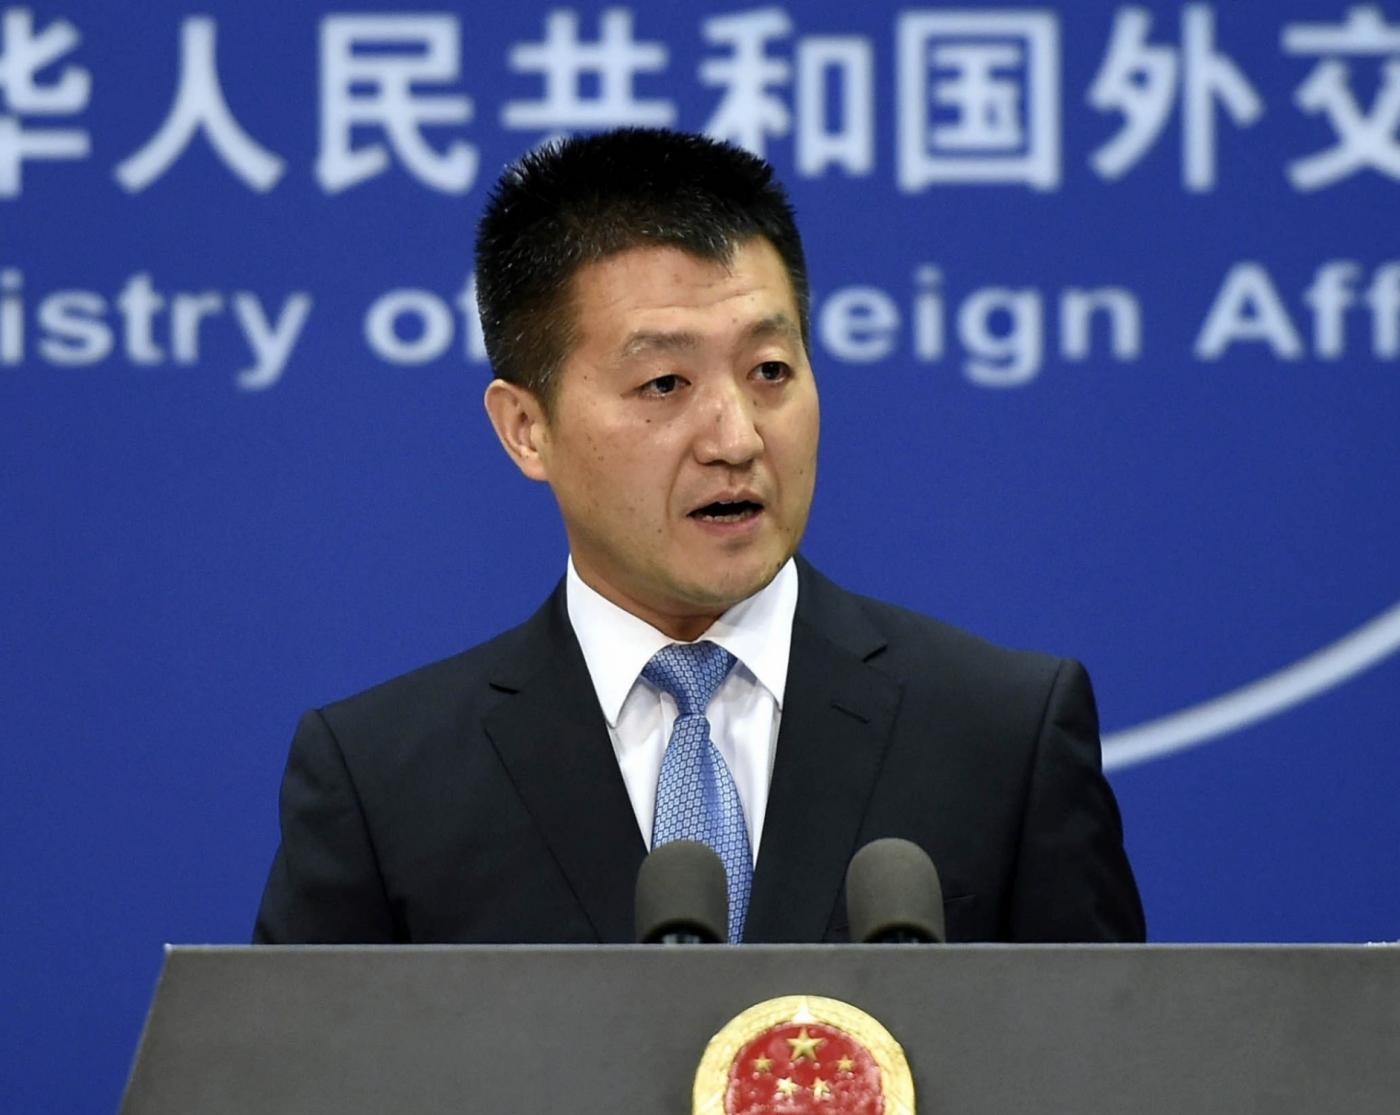 Lu Kang, a spokesperson for Chinese Foreign Ministry. (File Photo: IANS) by .